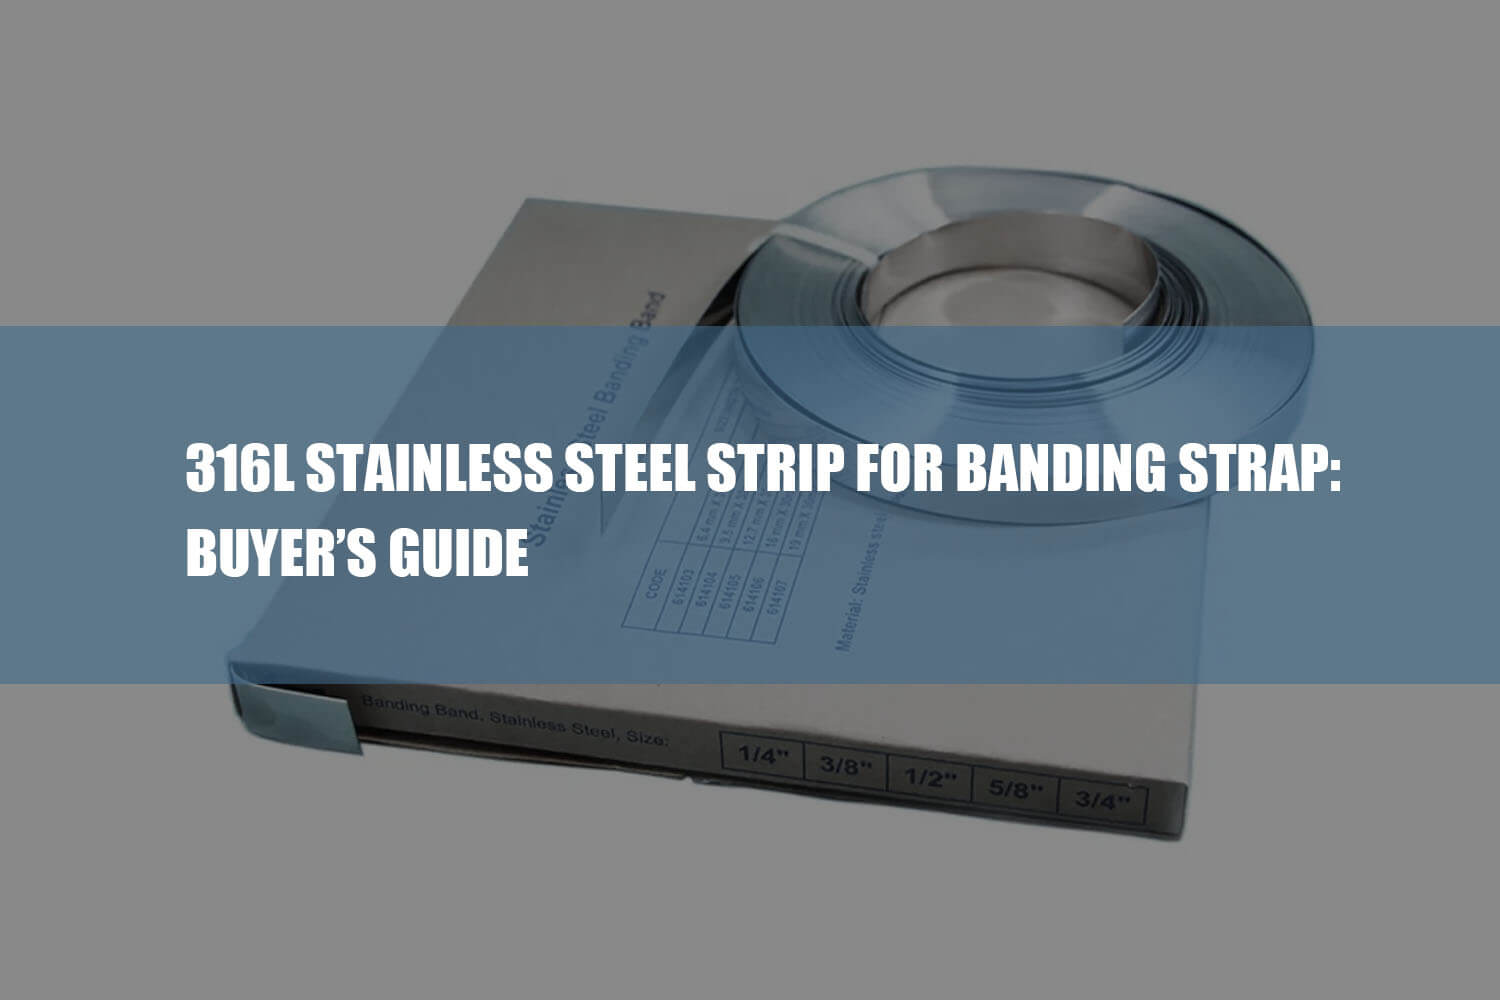 316l stainless steel strip for banding strap